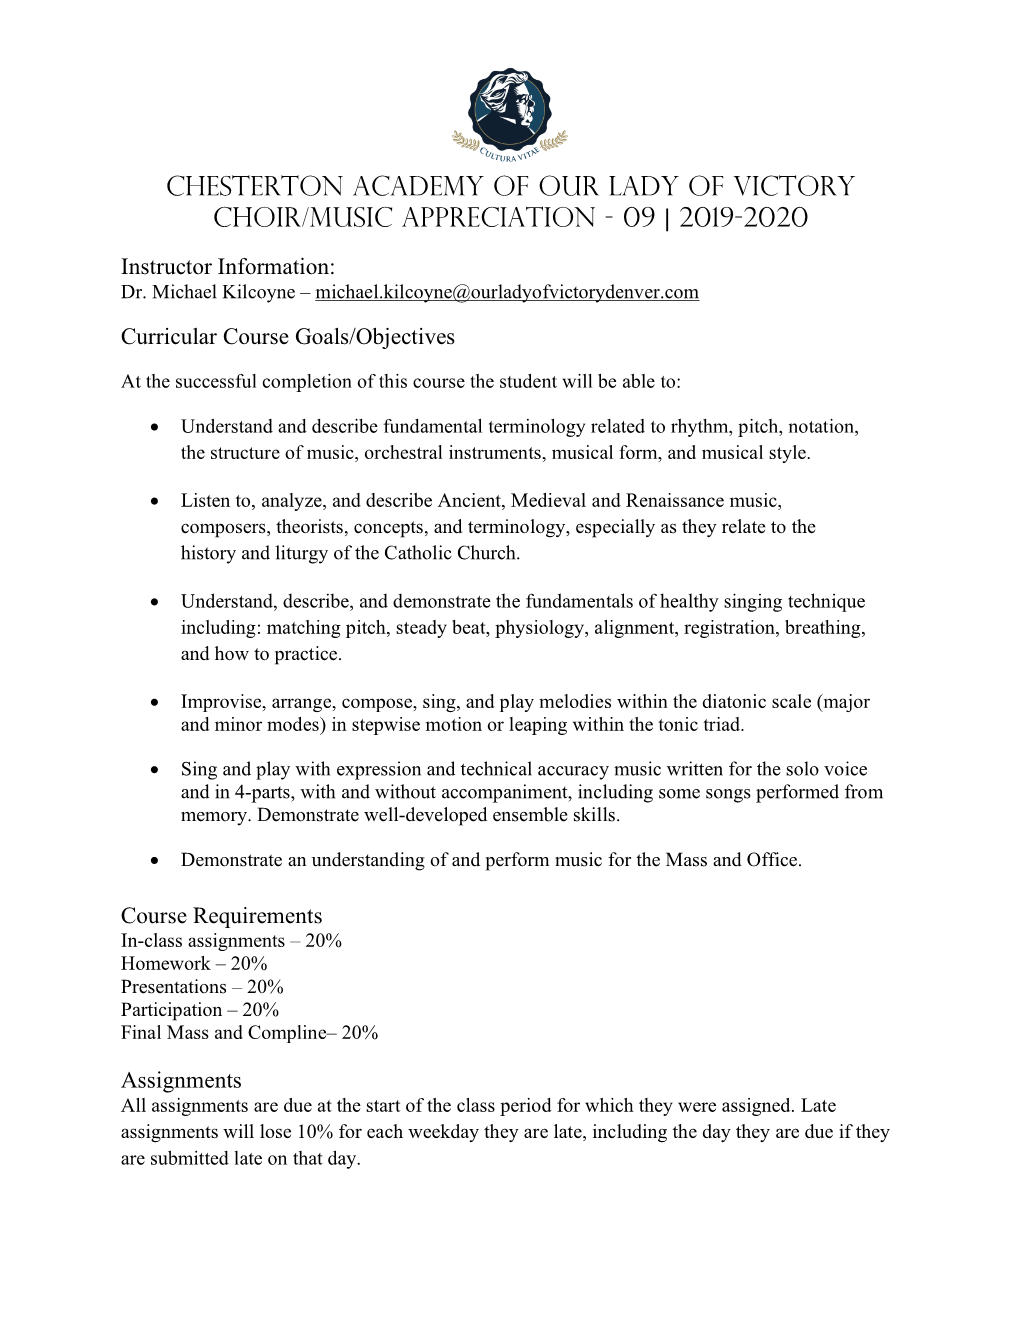 Chesterton Academy of Our Lady of Victory Choir/Music Appreciation - 09 | 2019-2020